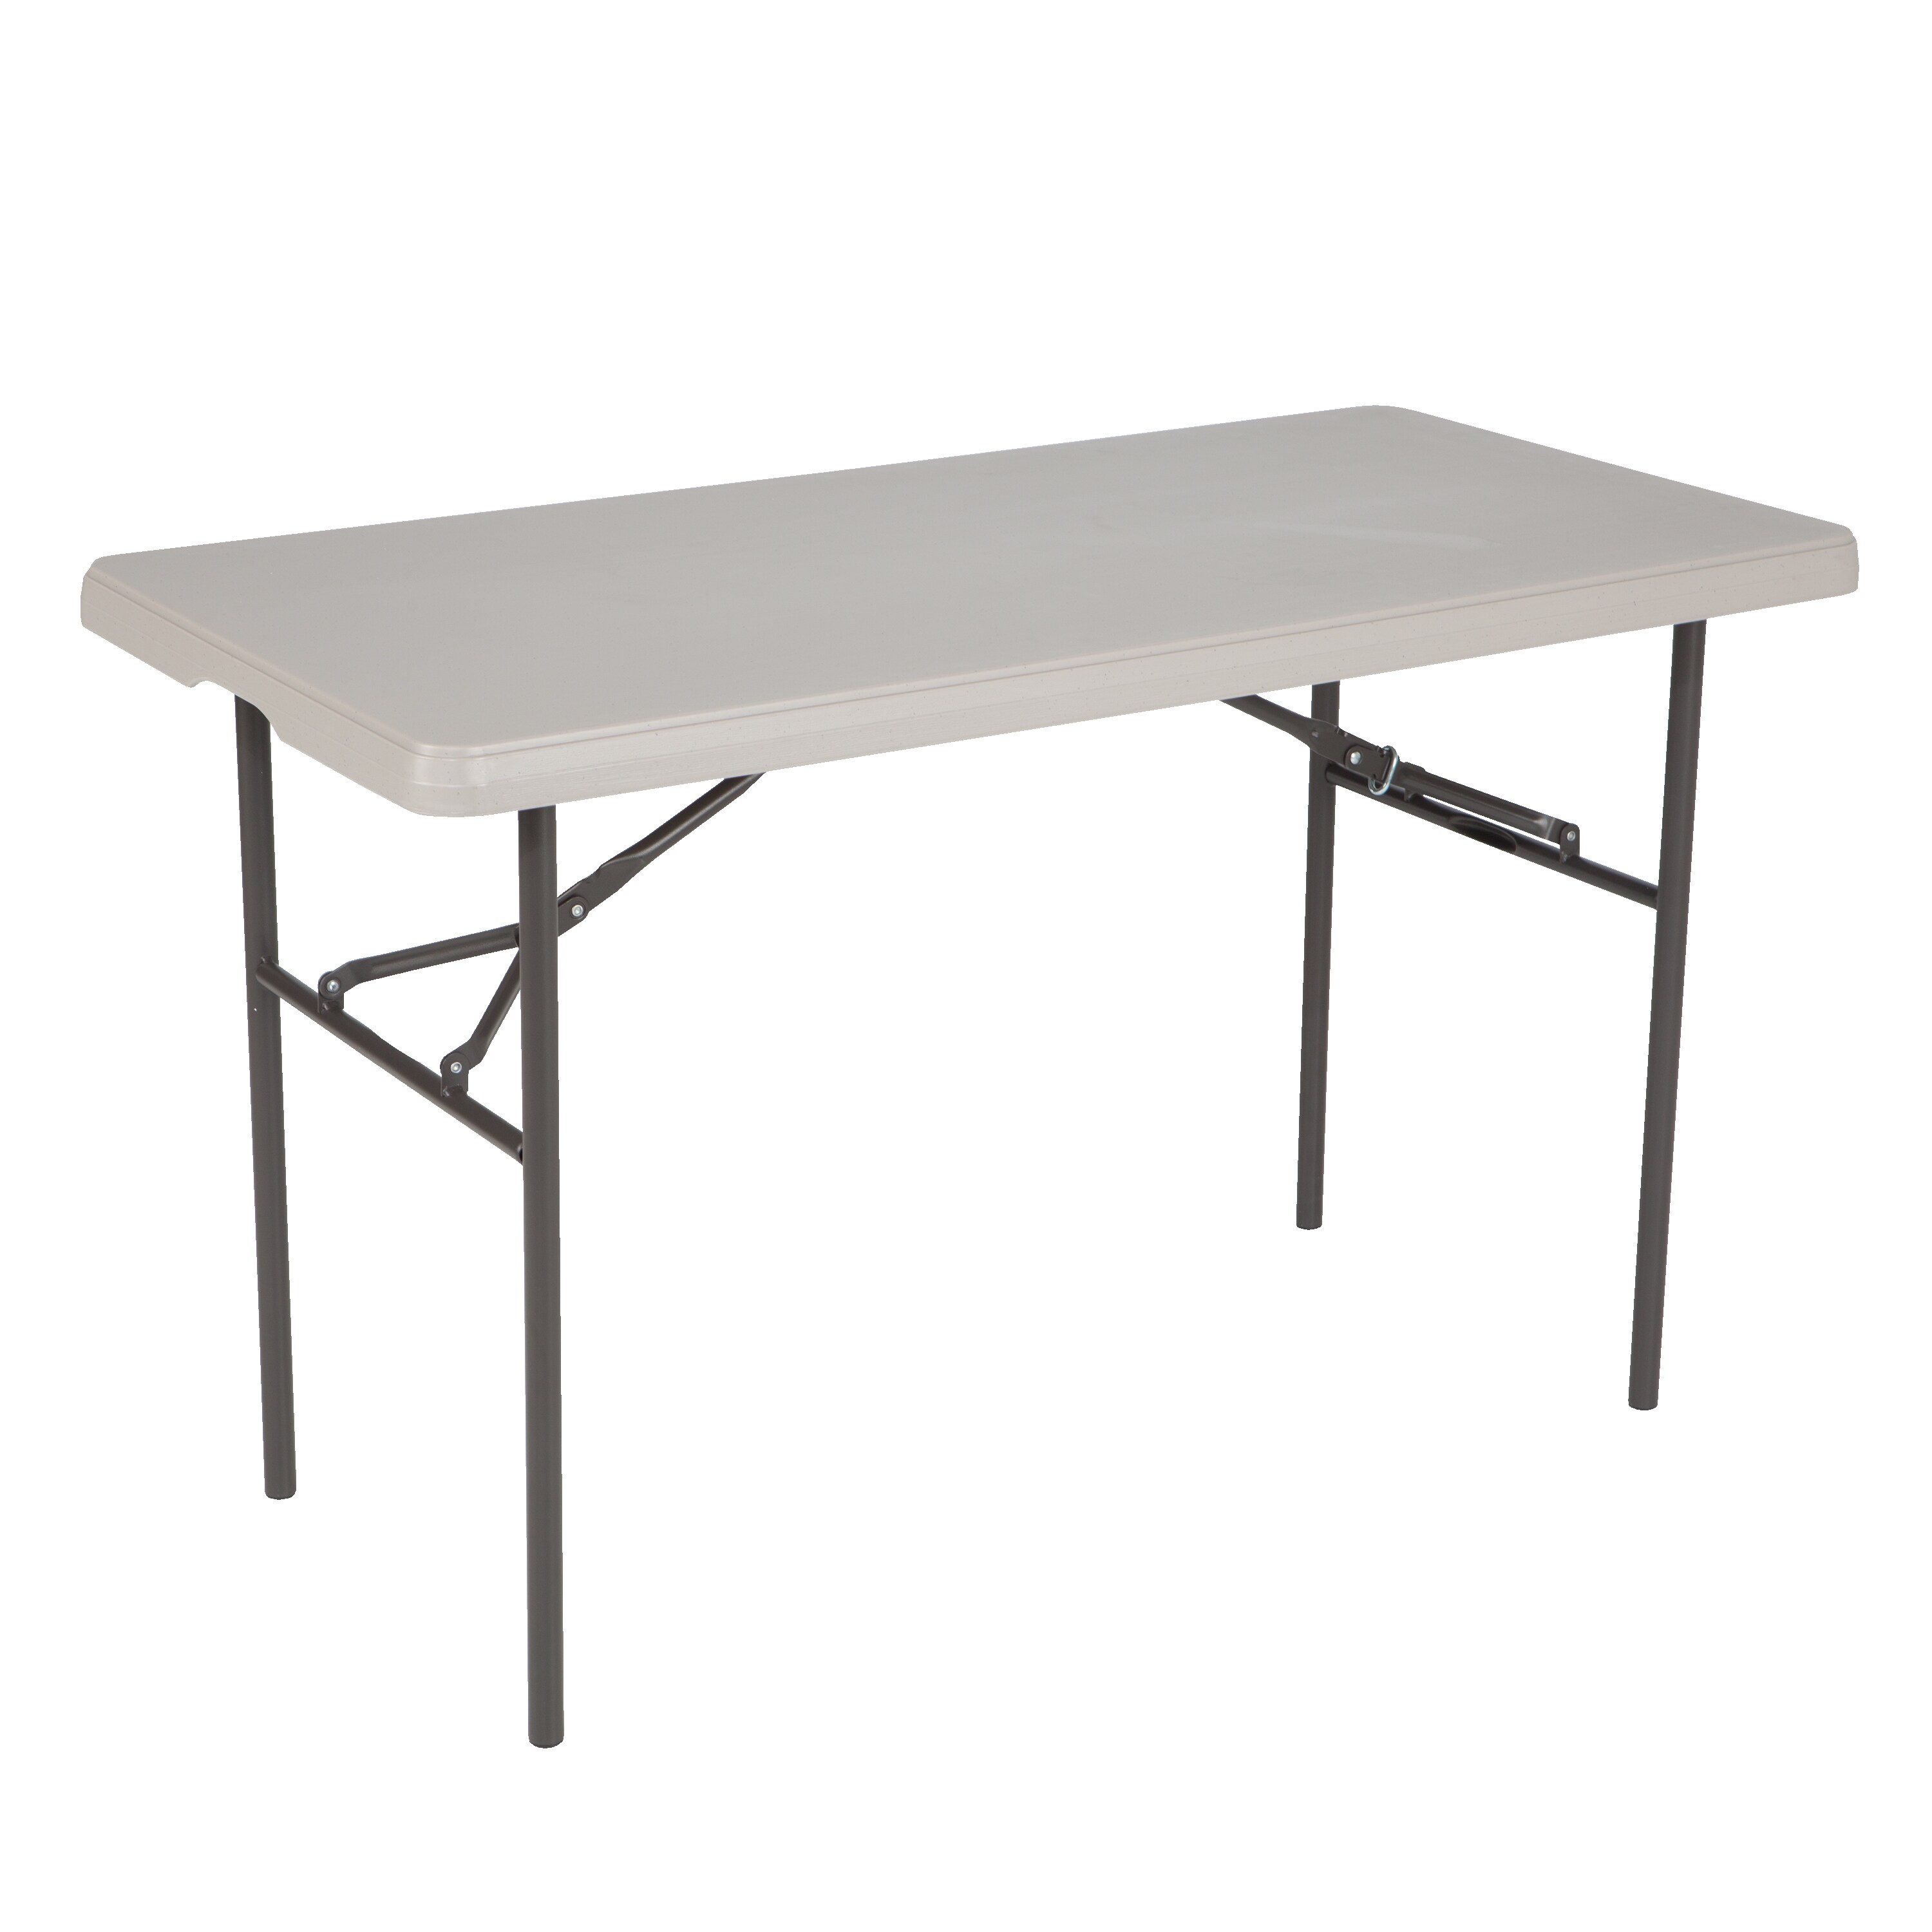 24" x 48" Commercial Plastic Folding Table Indoor Outdoor Heavy Duty 2 Seating 